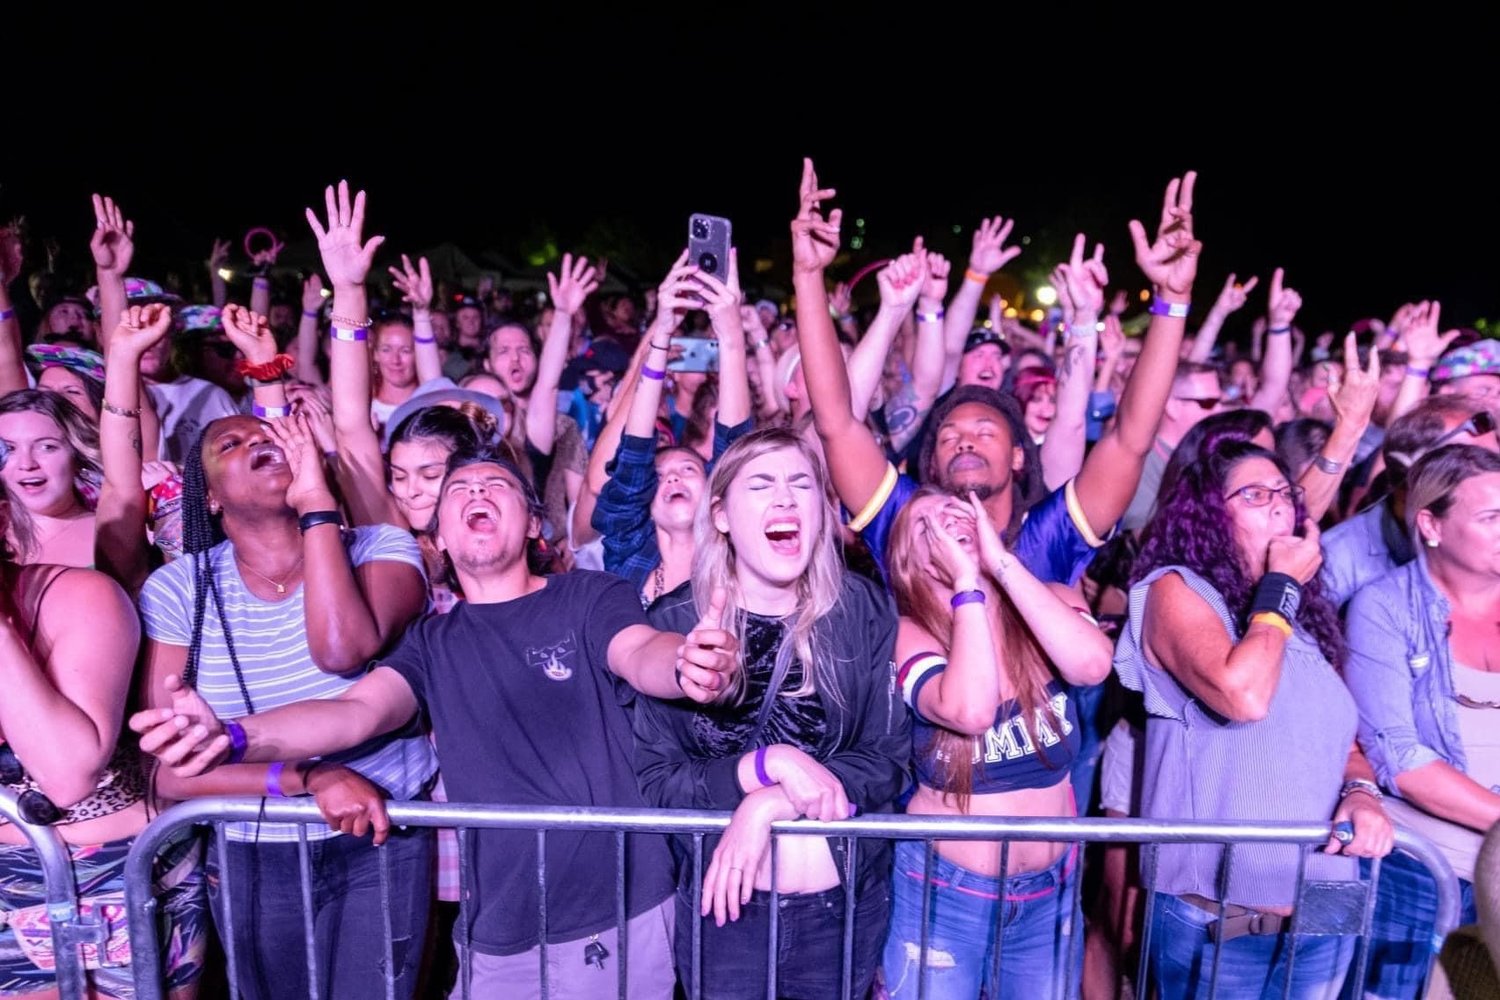 Concertgoers celebrate all things 1990s at last year’s festival.